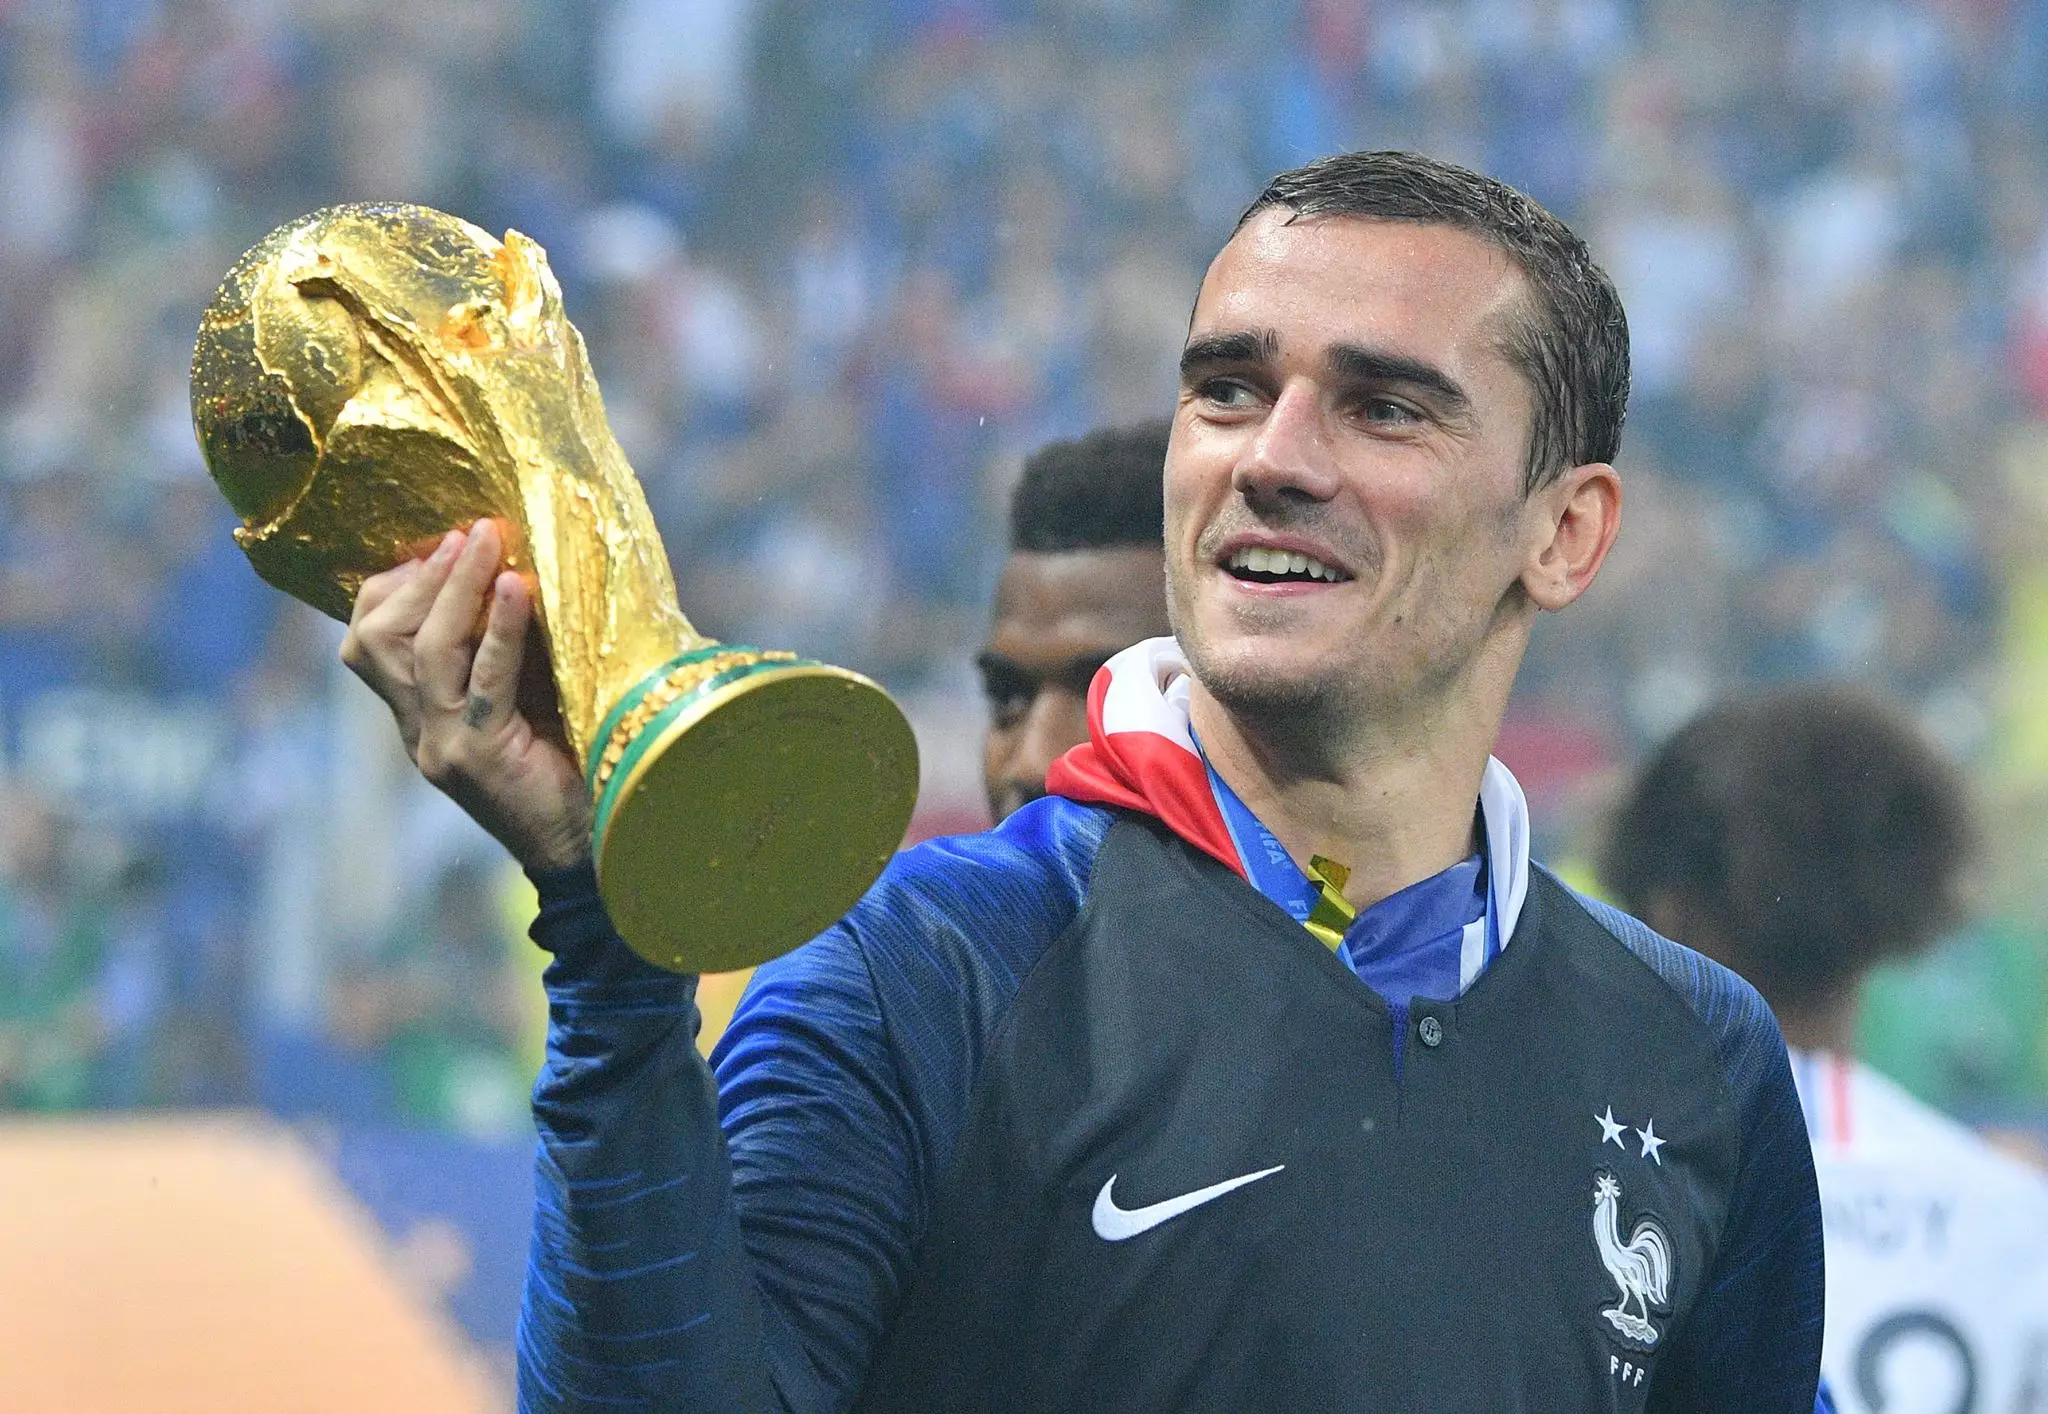 Griezmann celebrates with the World Cup. Image: PA